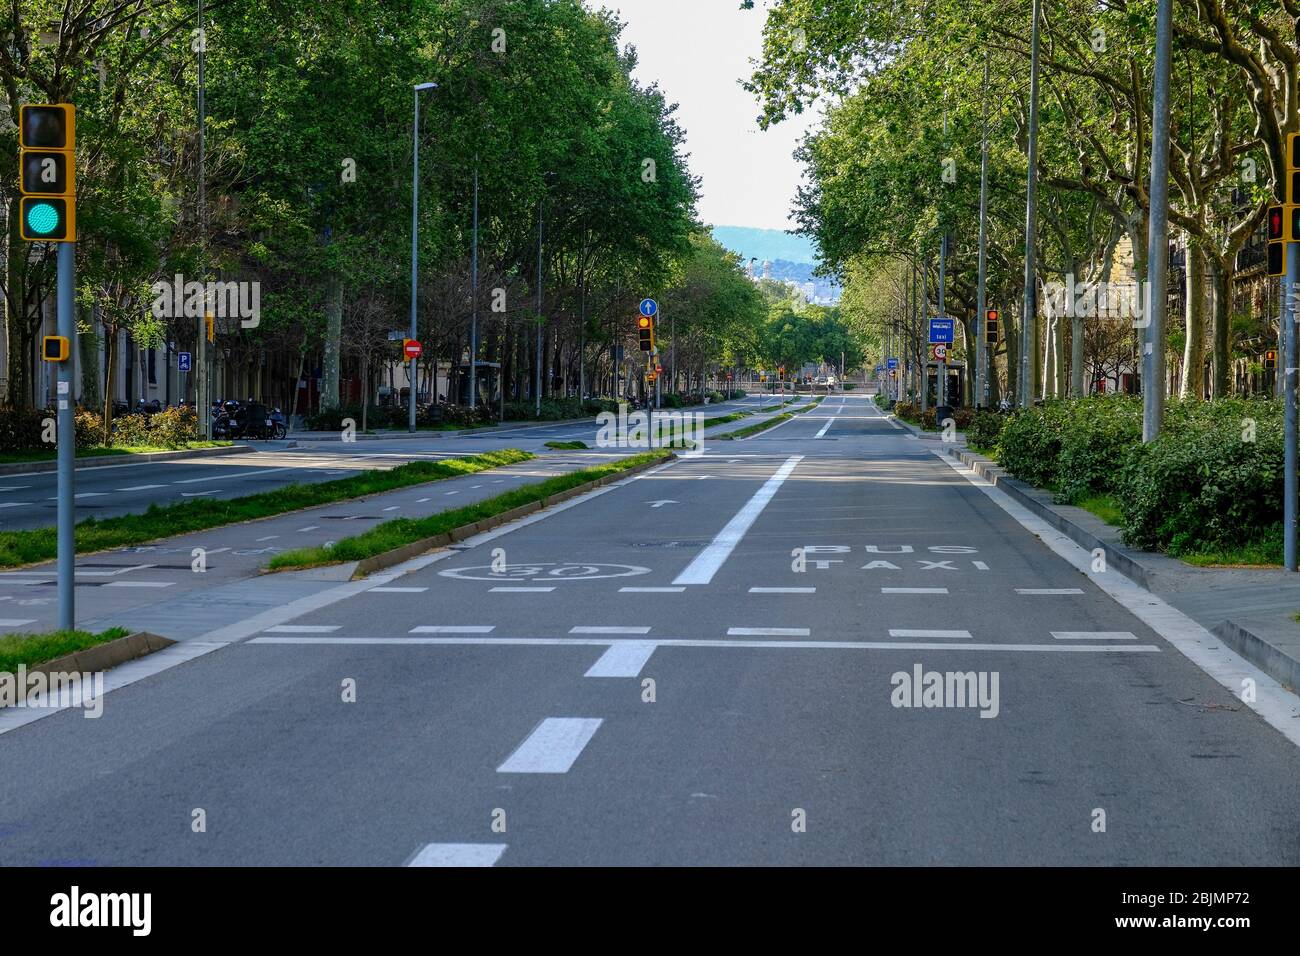 Spain is one of the countries most affected by the Covid-19 coronavirus outbreak. The Paseo de Sant Joan is completely deserted and its passage is Stock Photo